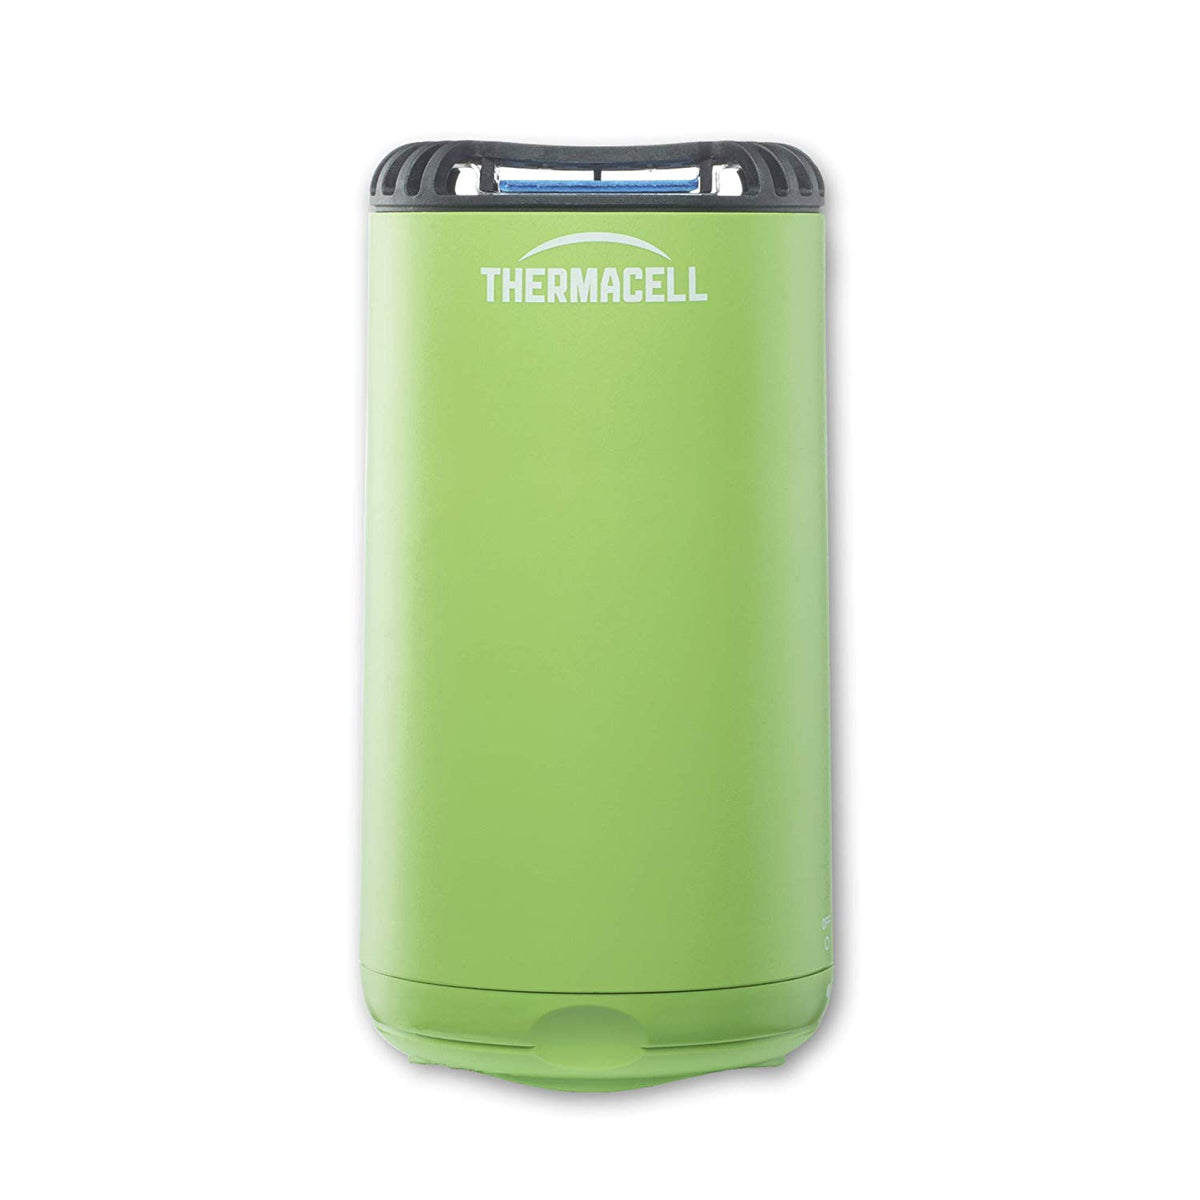 Thermacell MRPSG Patio Shield Mosquito Repeller, Greenery Green